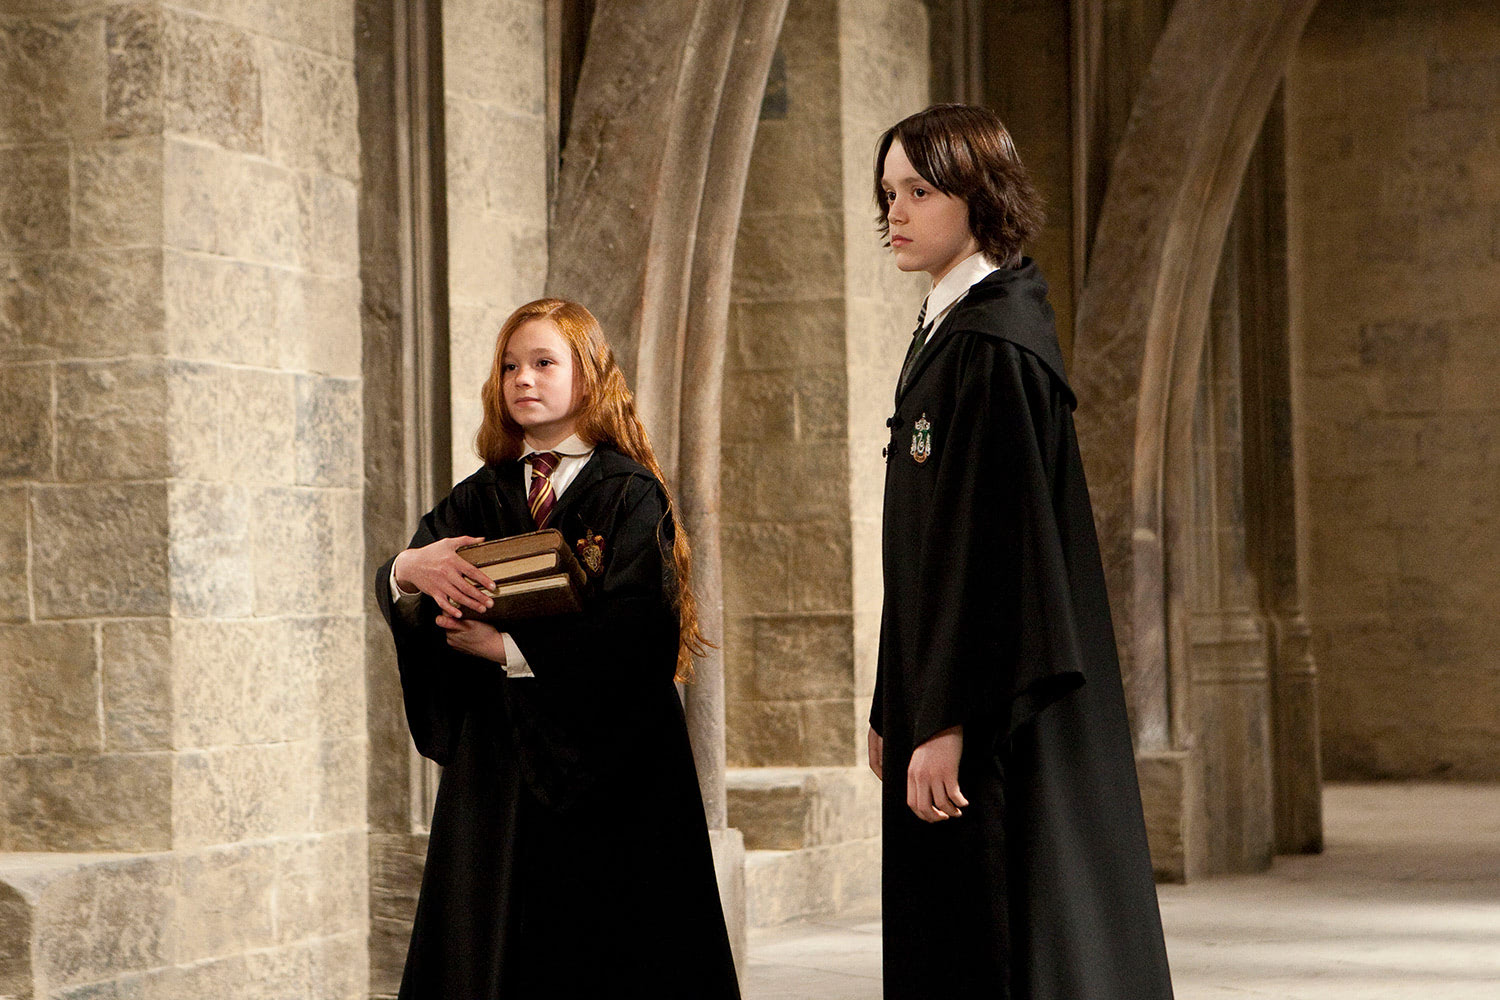 Young Lily and Snape